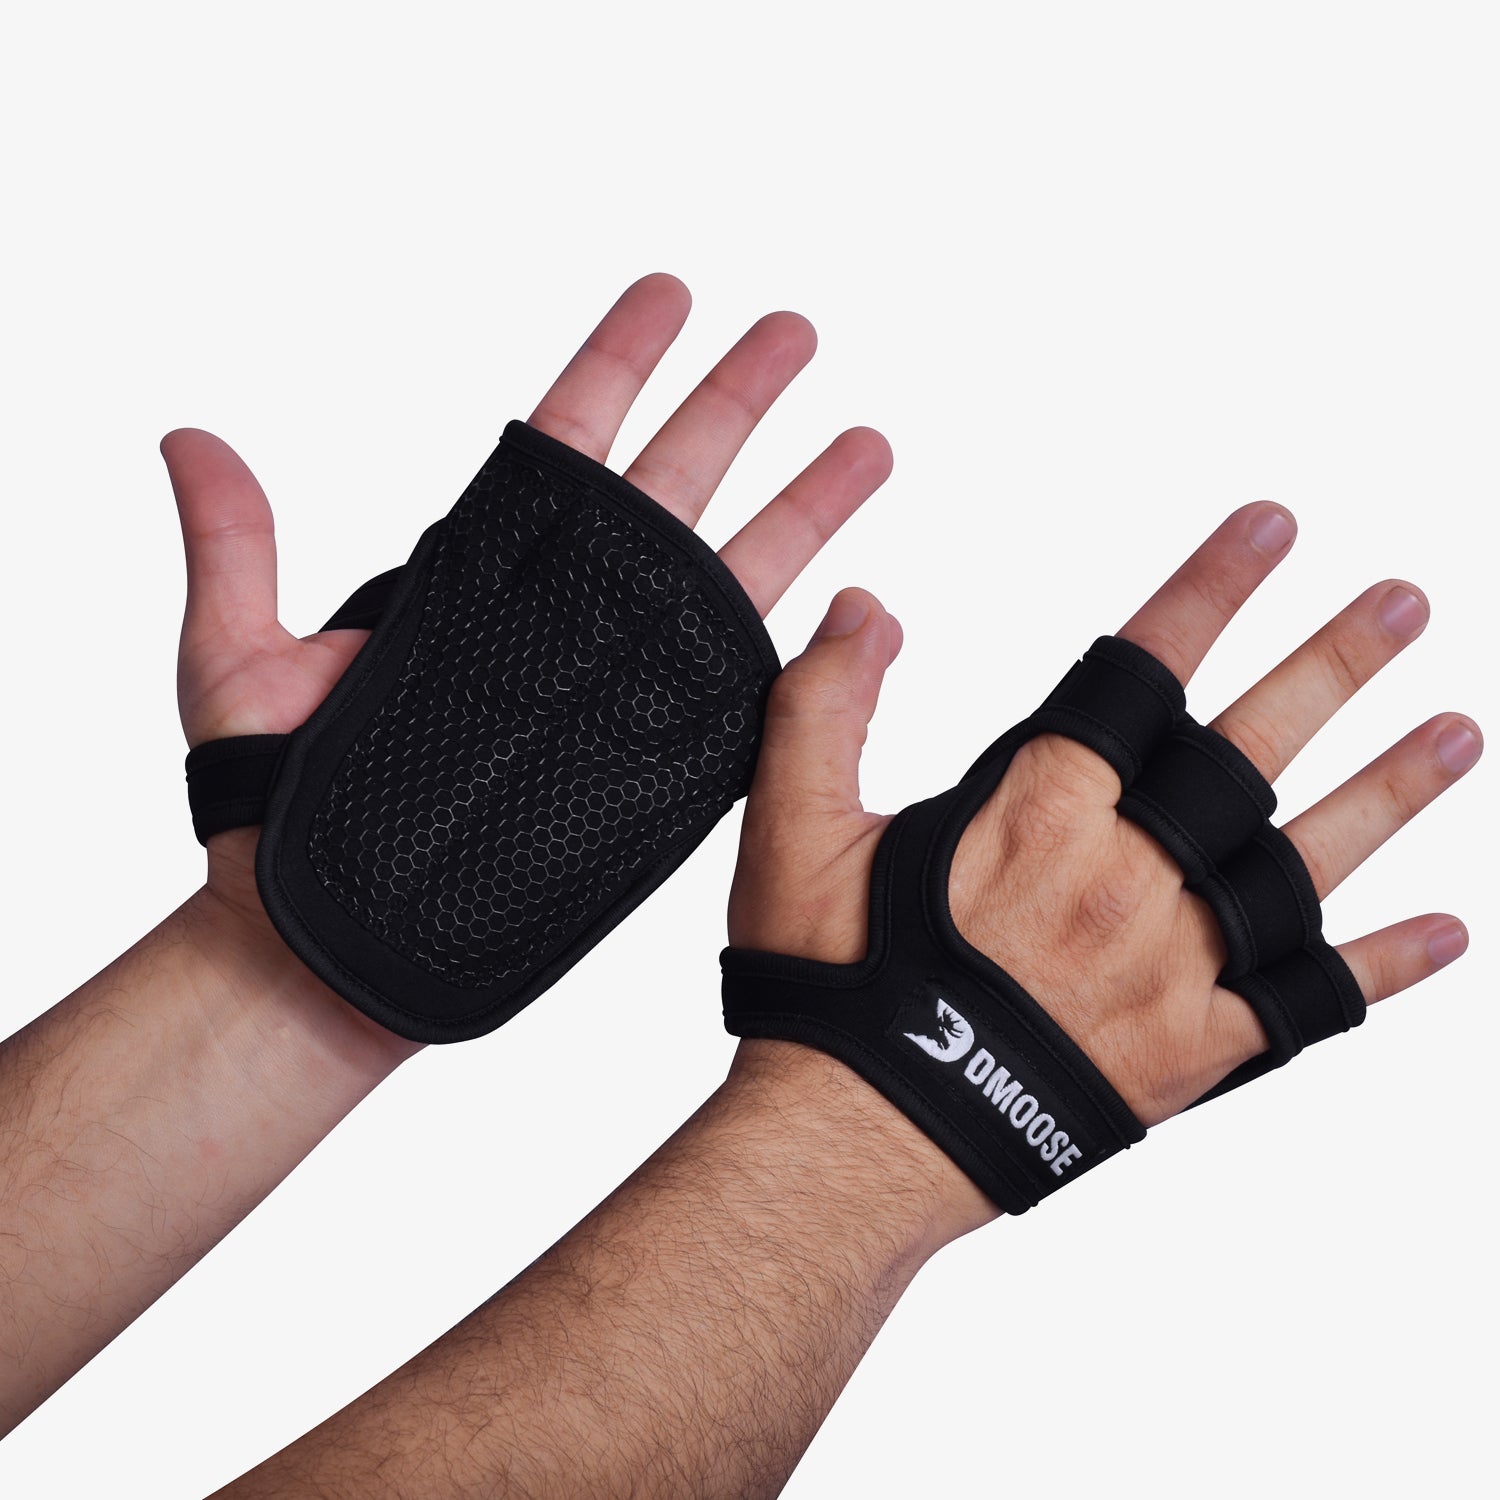 Fitness Gloves Grip Power Pads PRO - Lifting Grips The Alternative